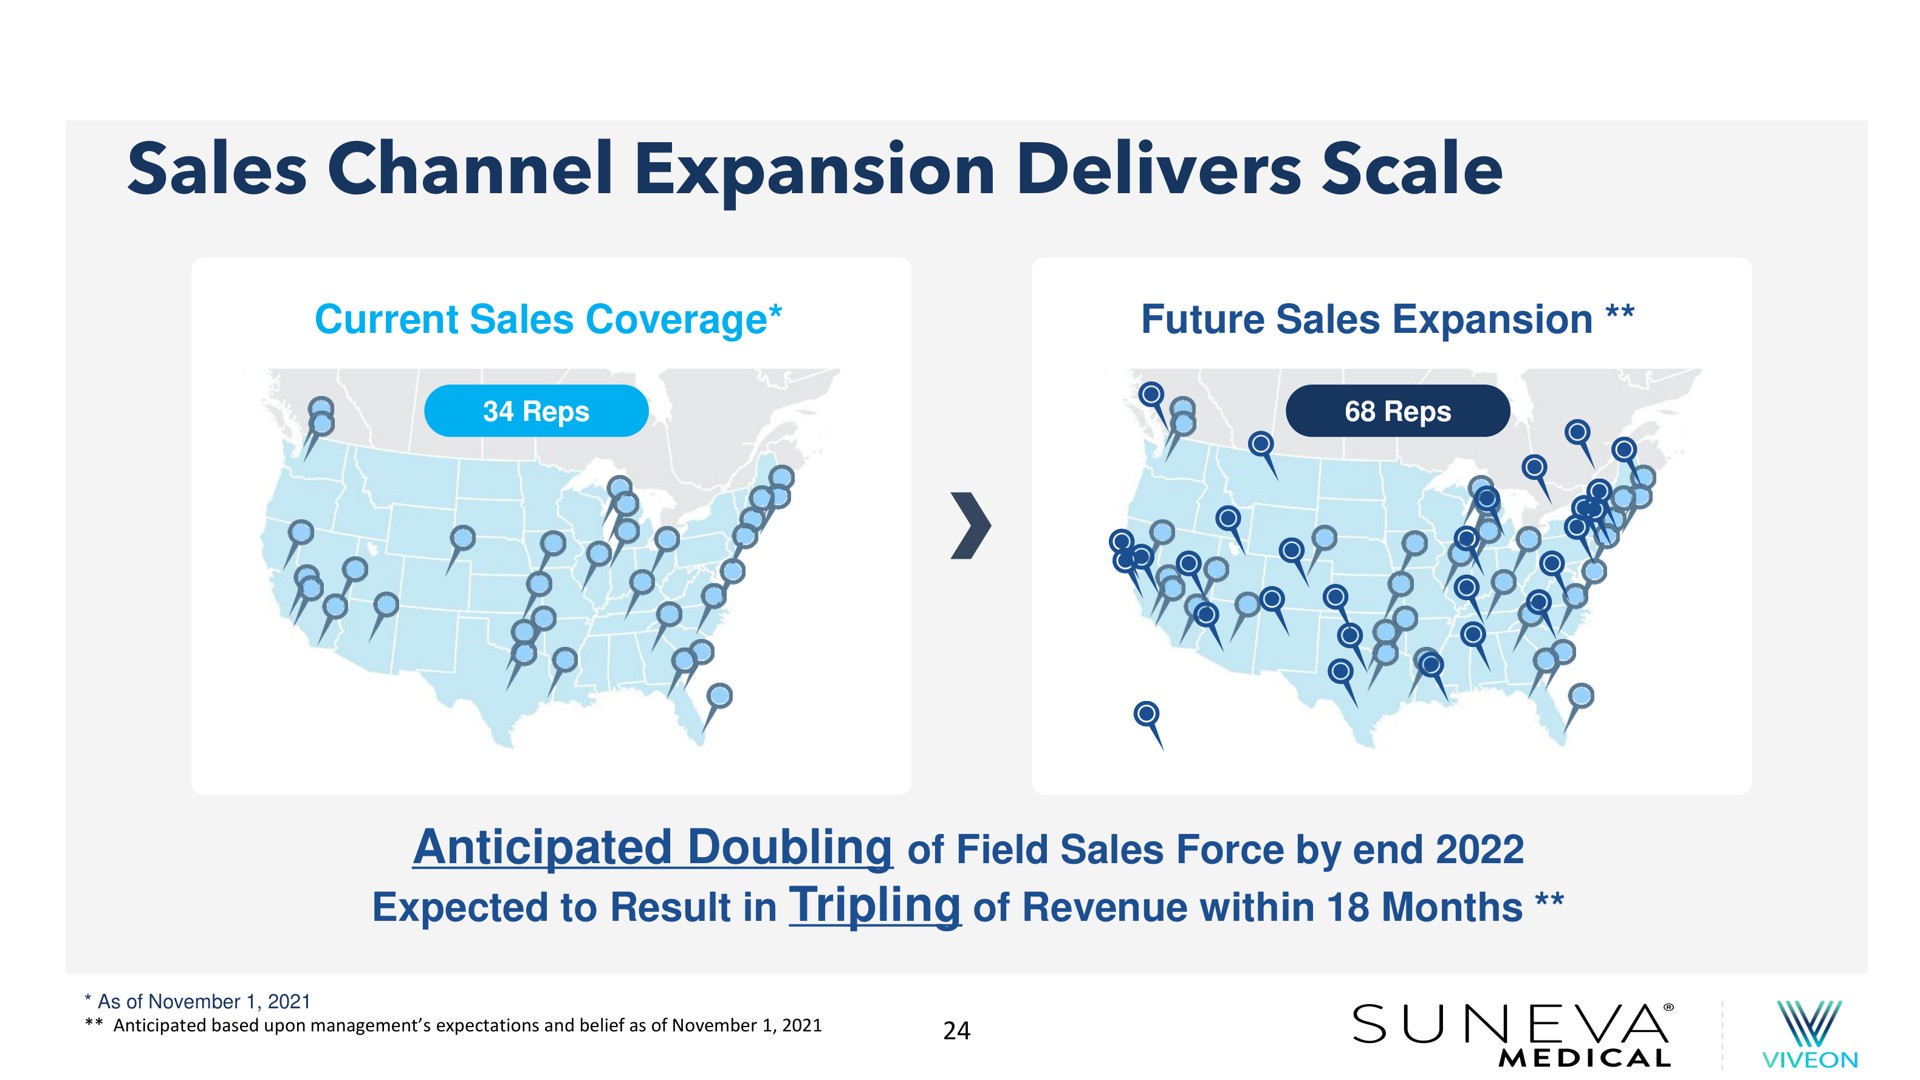 sales channel expansion delivers scale be a | Suneva Medical